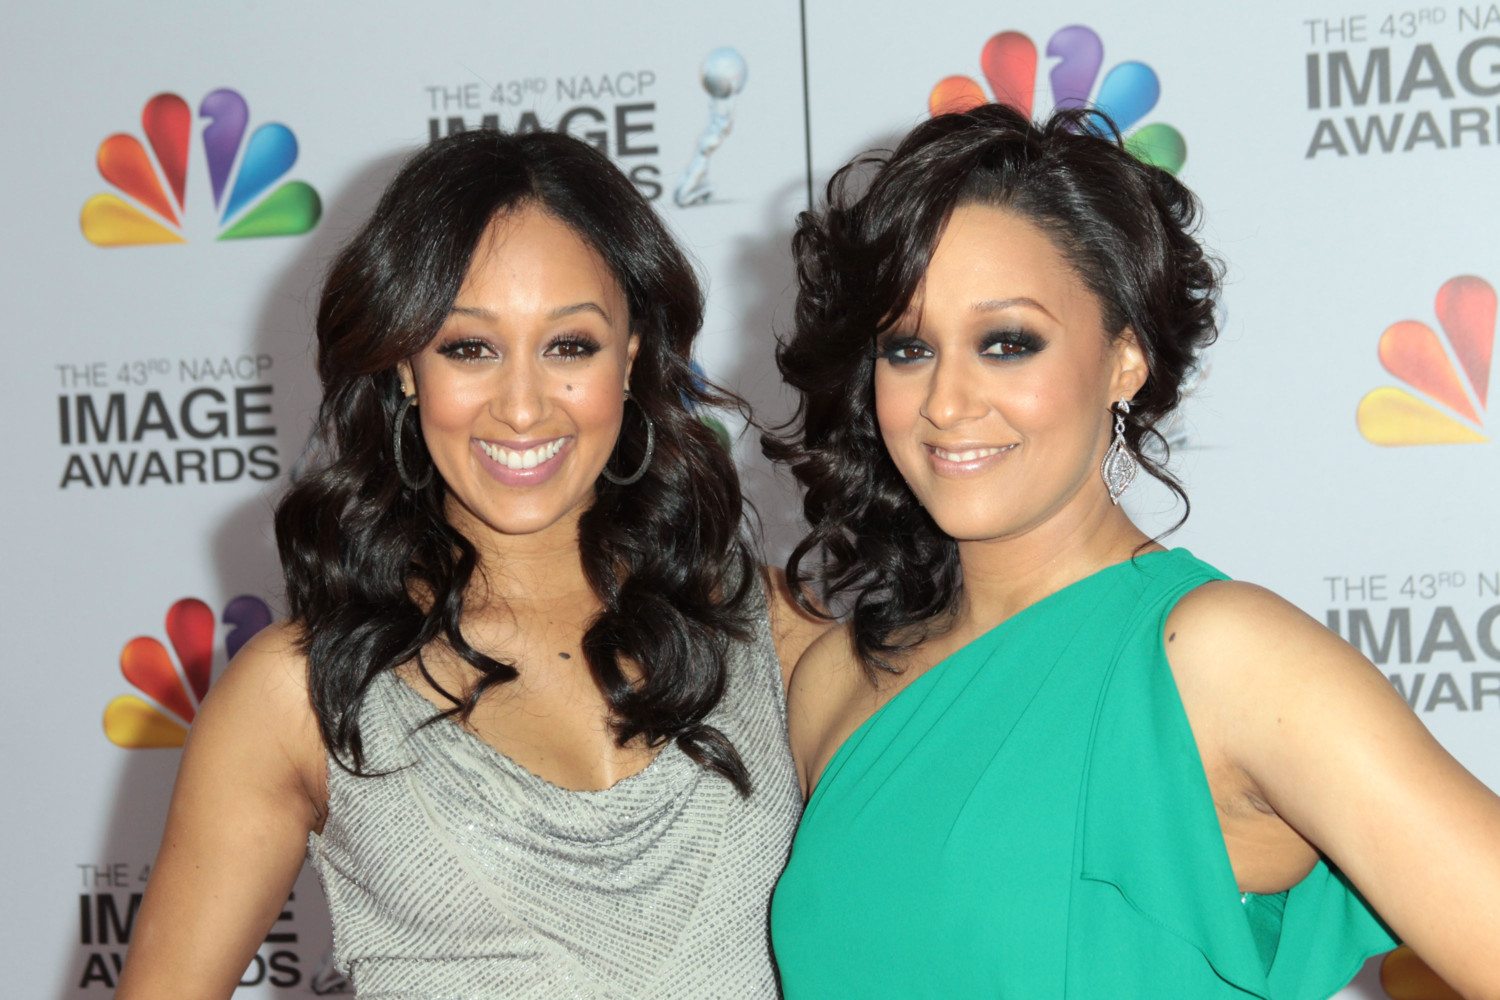 43rd NAACP Image Awards - Arrivals